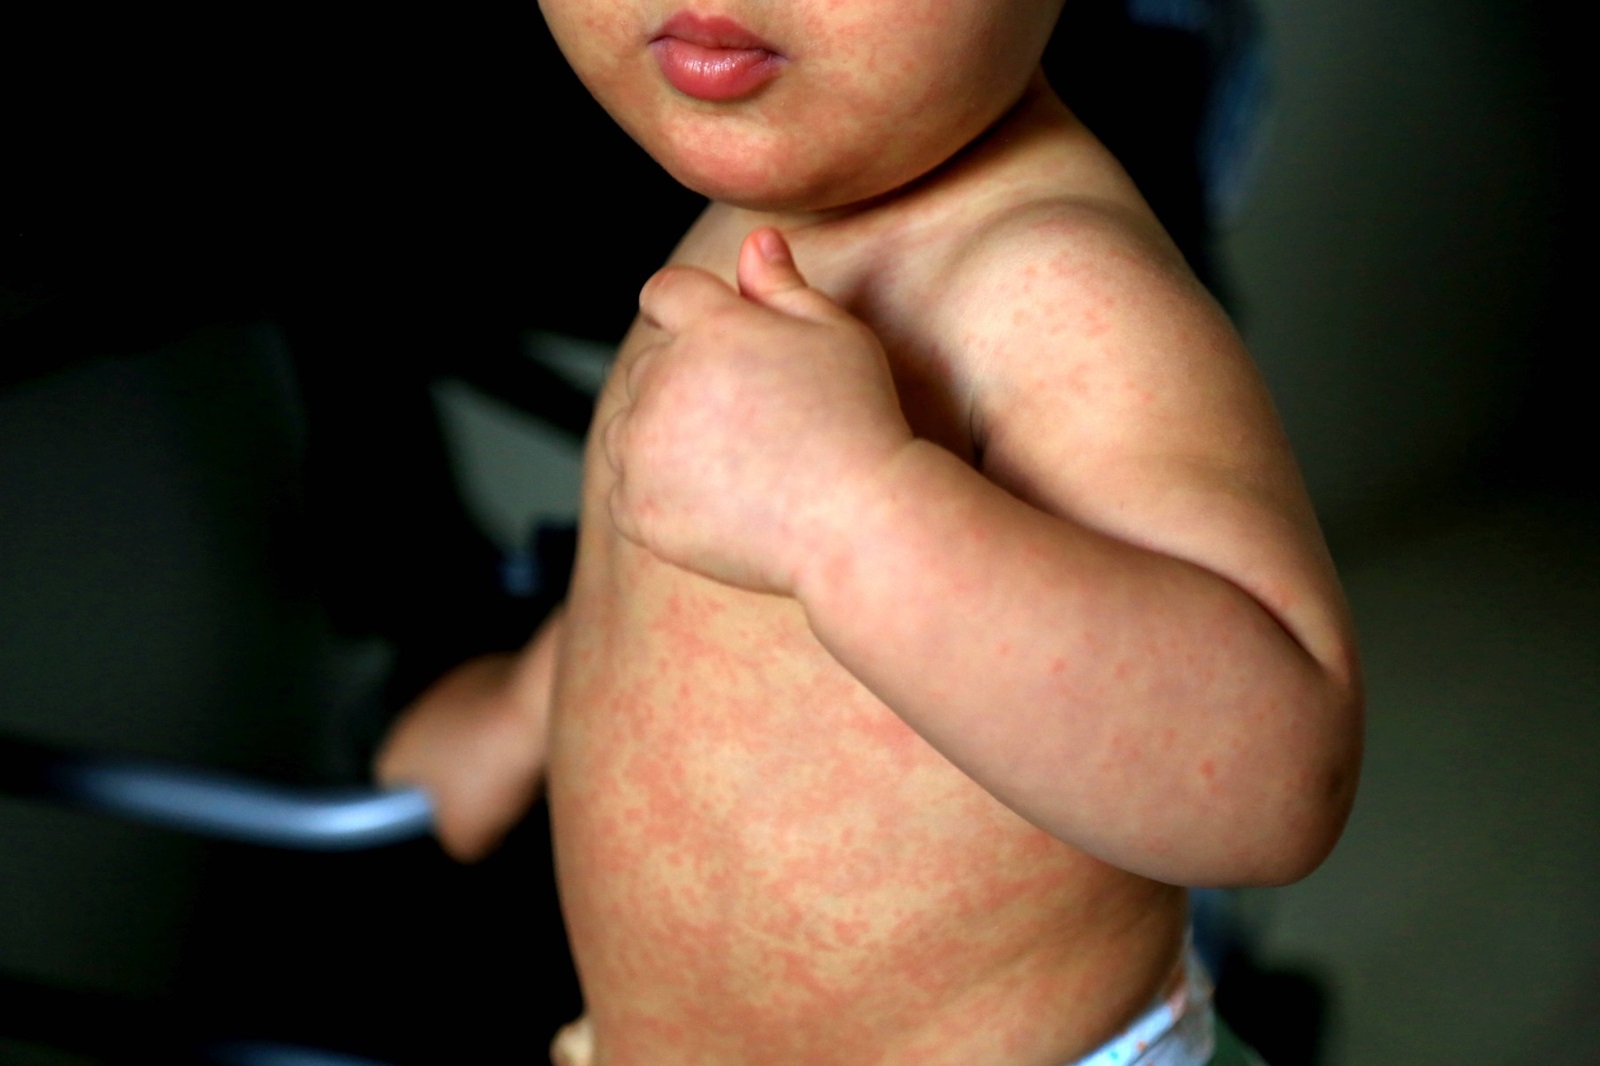 child with measles symptoms salvador, bahia / brazil - february 14, 2017: Child with measles symptoms is seen with small red spots on body and feverish state. *** Local Caption *** . SALVADOR BAHIA BRASIL Copyright: xJoaxSouzax 220117JOA05Z,Image: 803183975, License: Rights-managed, Restrictions: imago is entitled to issue a simple usage license at the time of provision. Personality and trademark rights as well as copyright laws regarding art-works shown must be observed. Commercial use at your own risk., Credit images as "Profimedia/ IMAGO", Model Release: no, Credit line: Joa Souza / imago stock&people / Profimedia